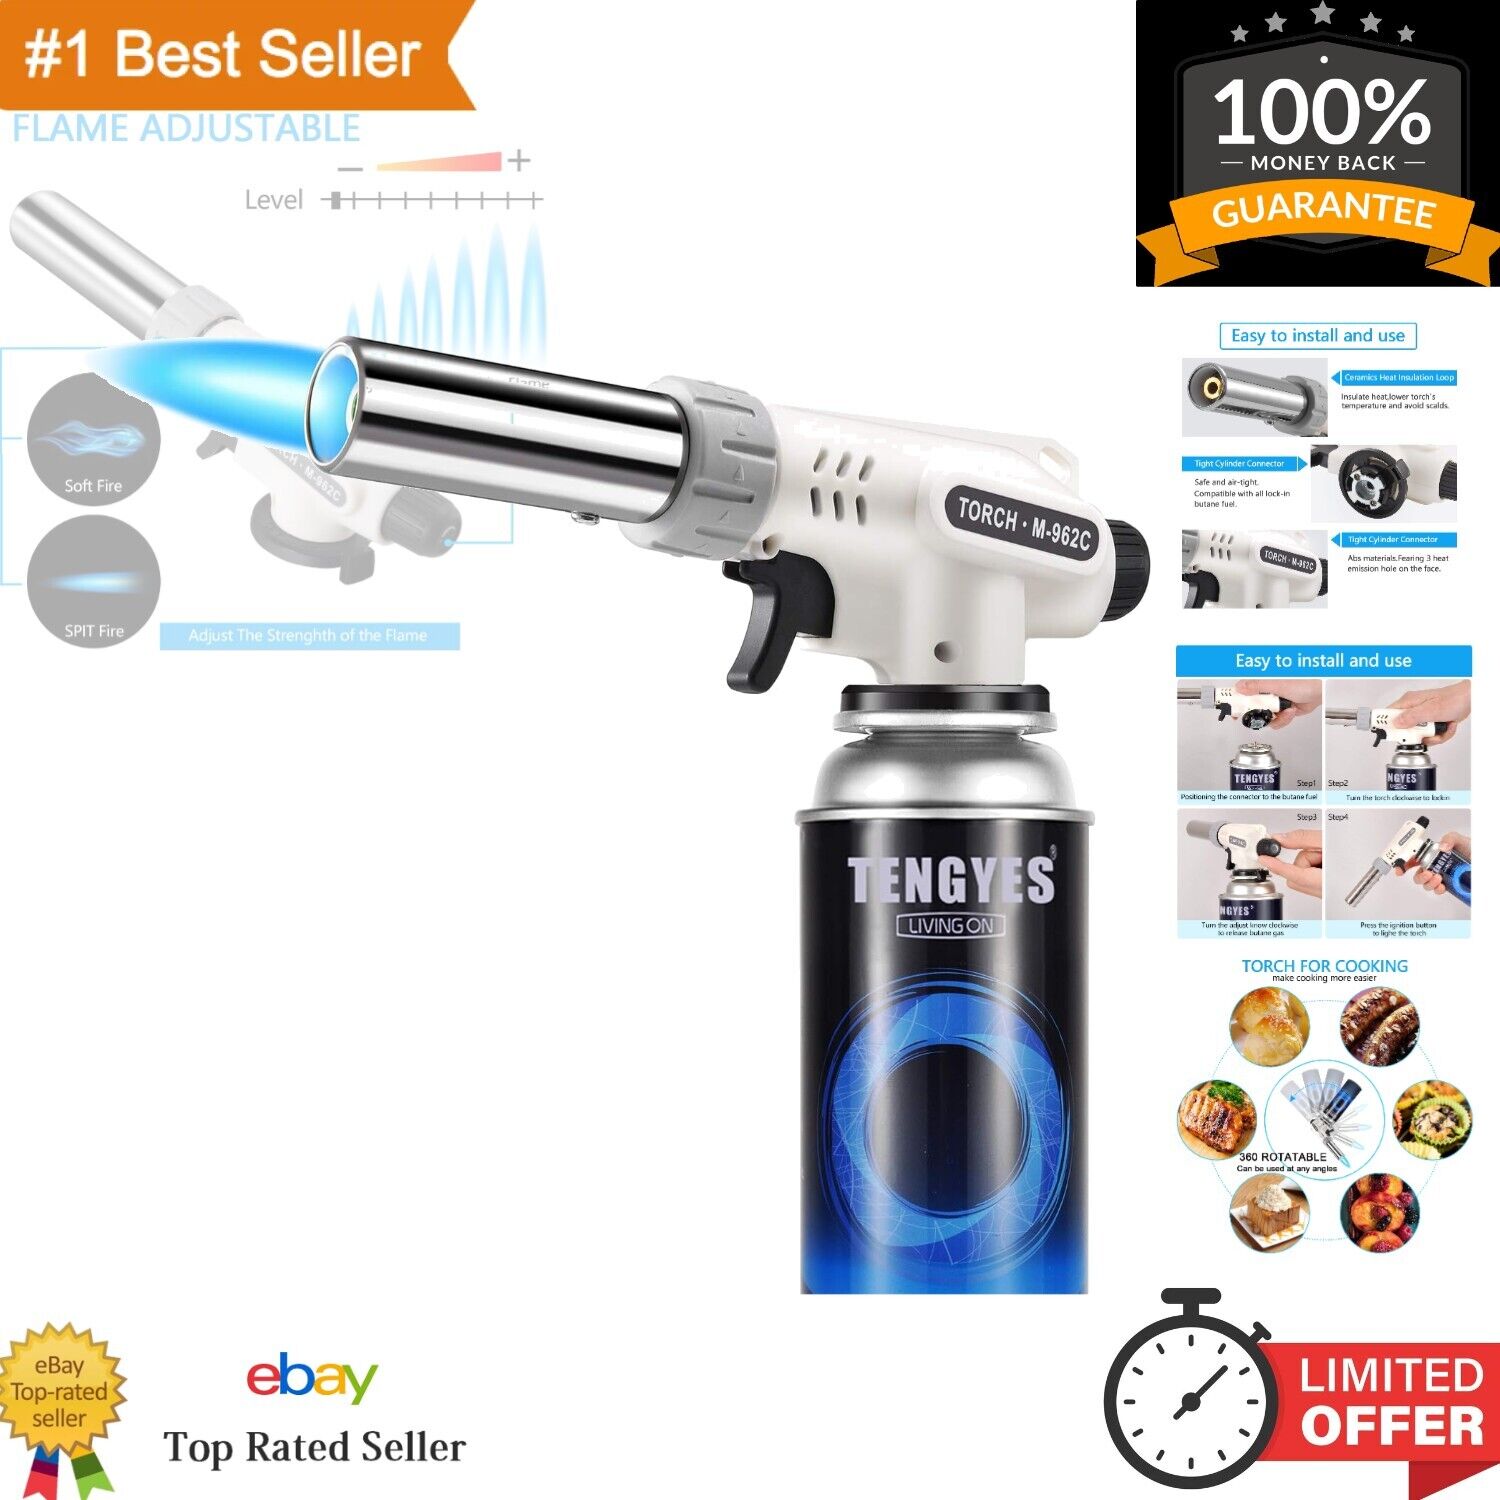 Kitchen Butane Blow Torch - Adjustable Flame for Cooking, Baking, Jewelry Making